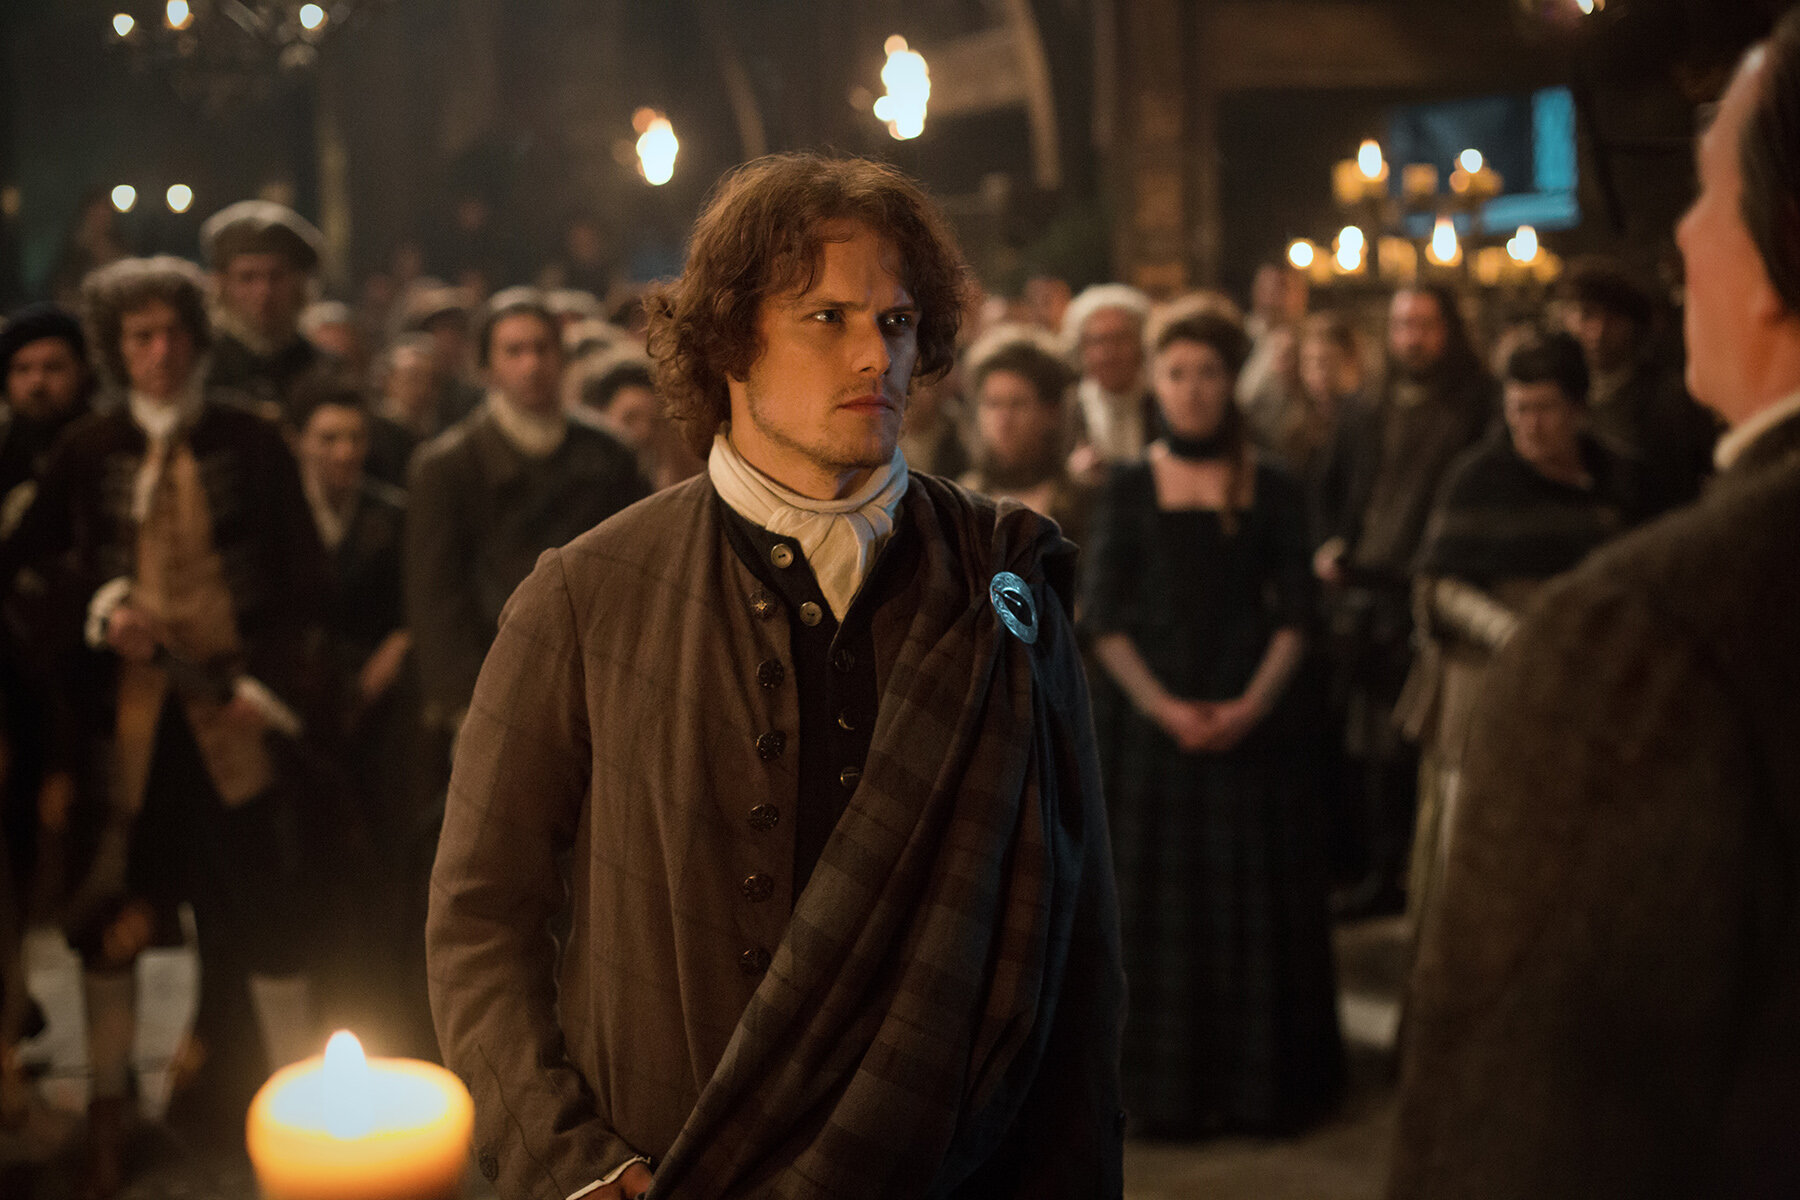 Jamie at the gathering speaks with the leader Colum MacKenzie in Outlander